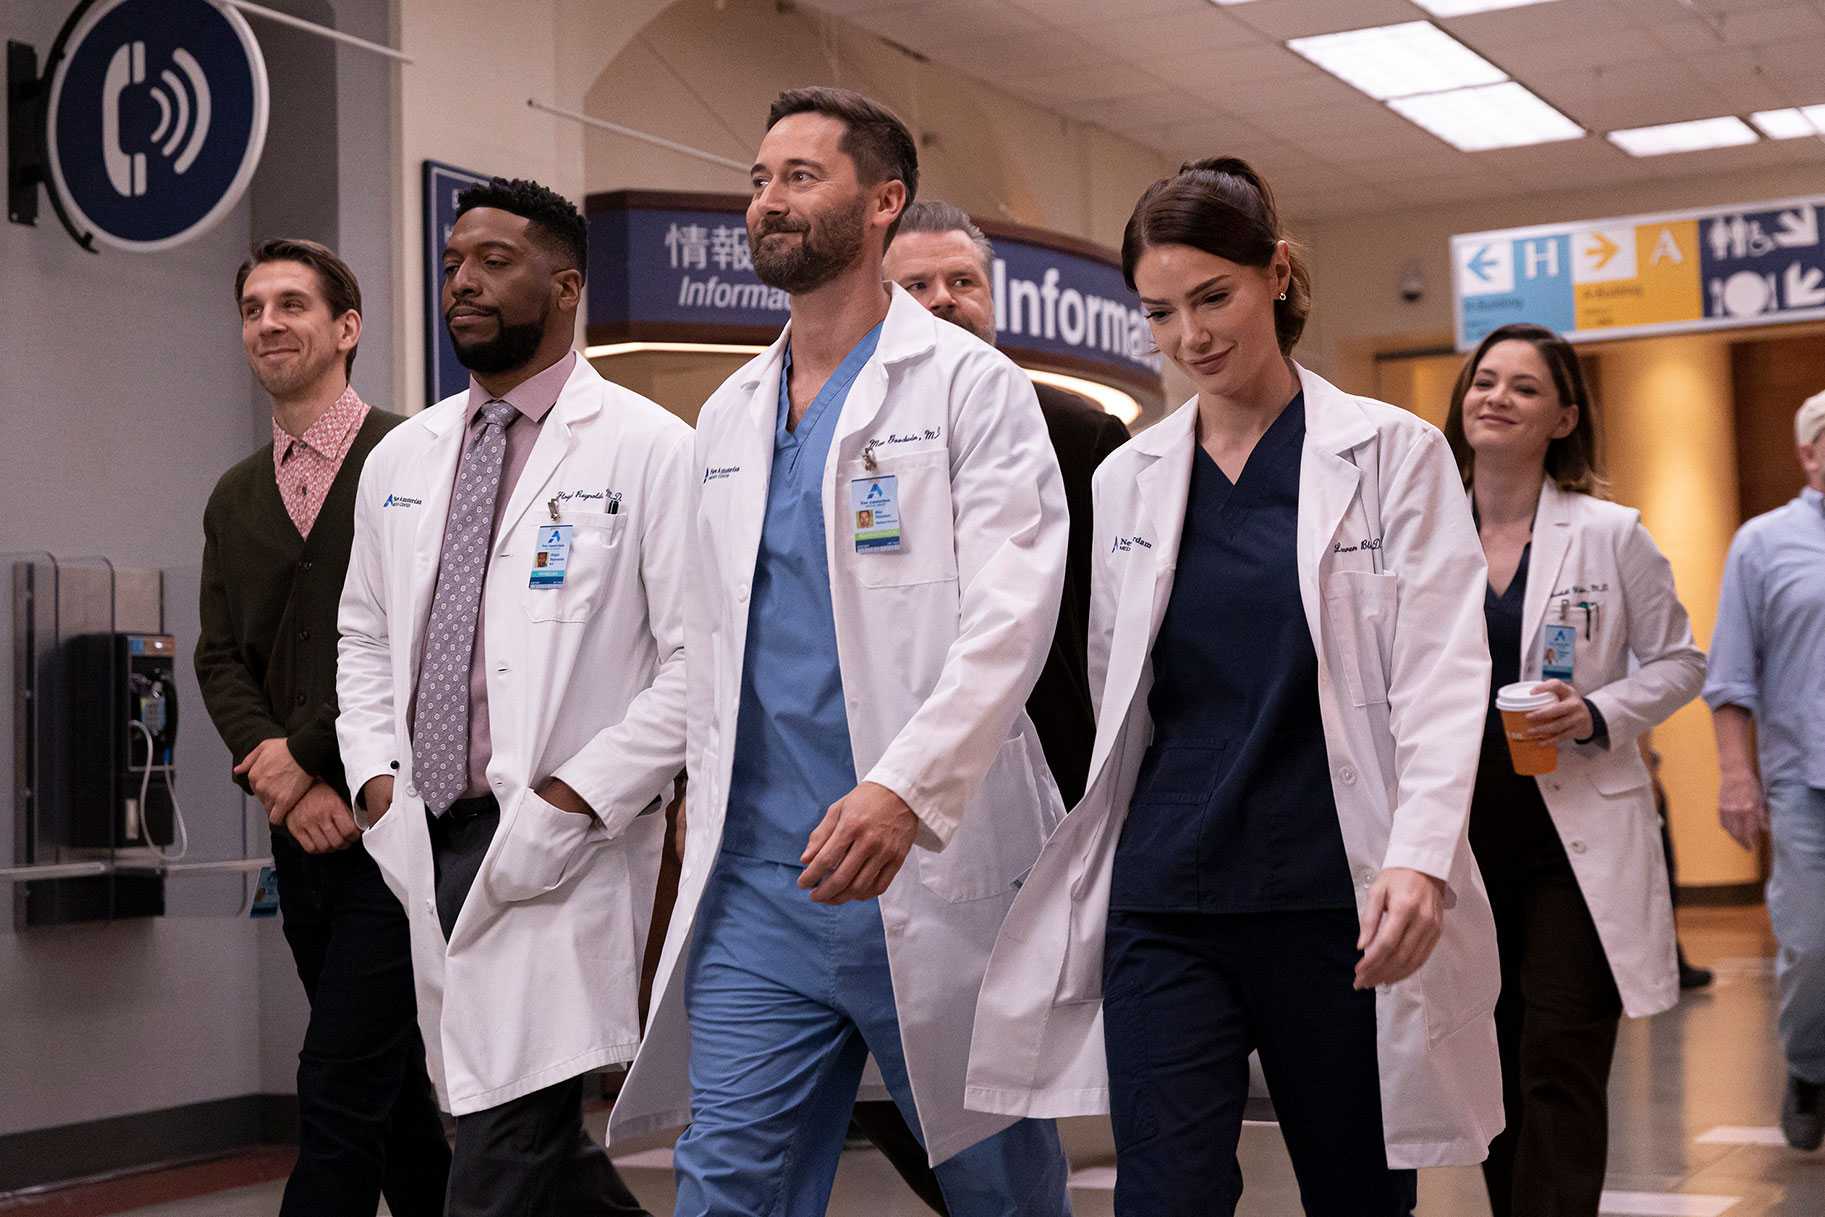 New Amsterdam spin off in the works, will be set 30 years after the original series